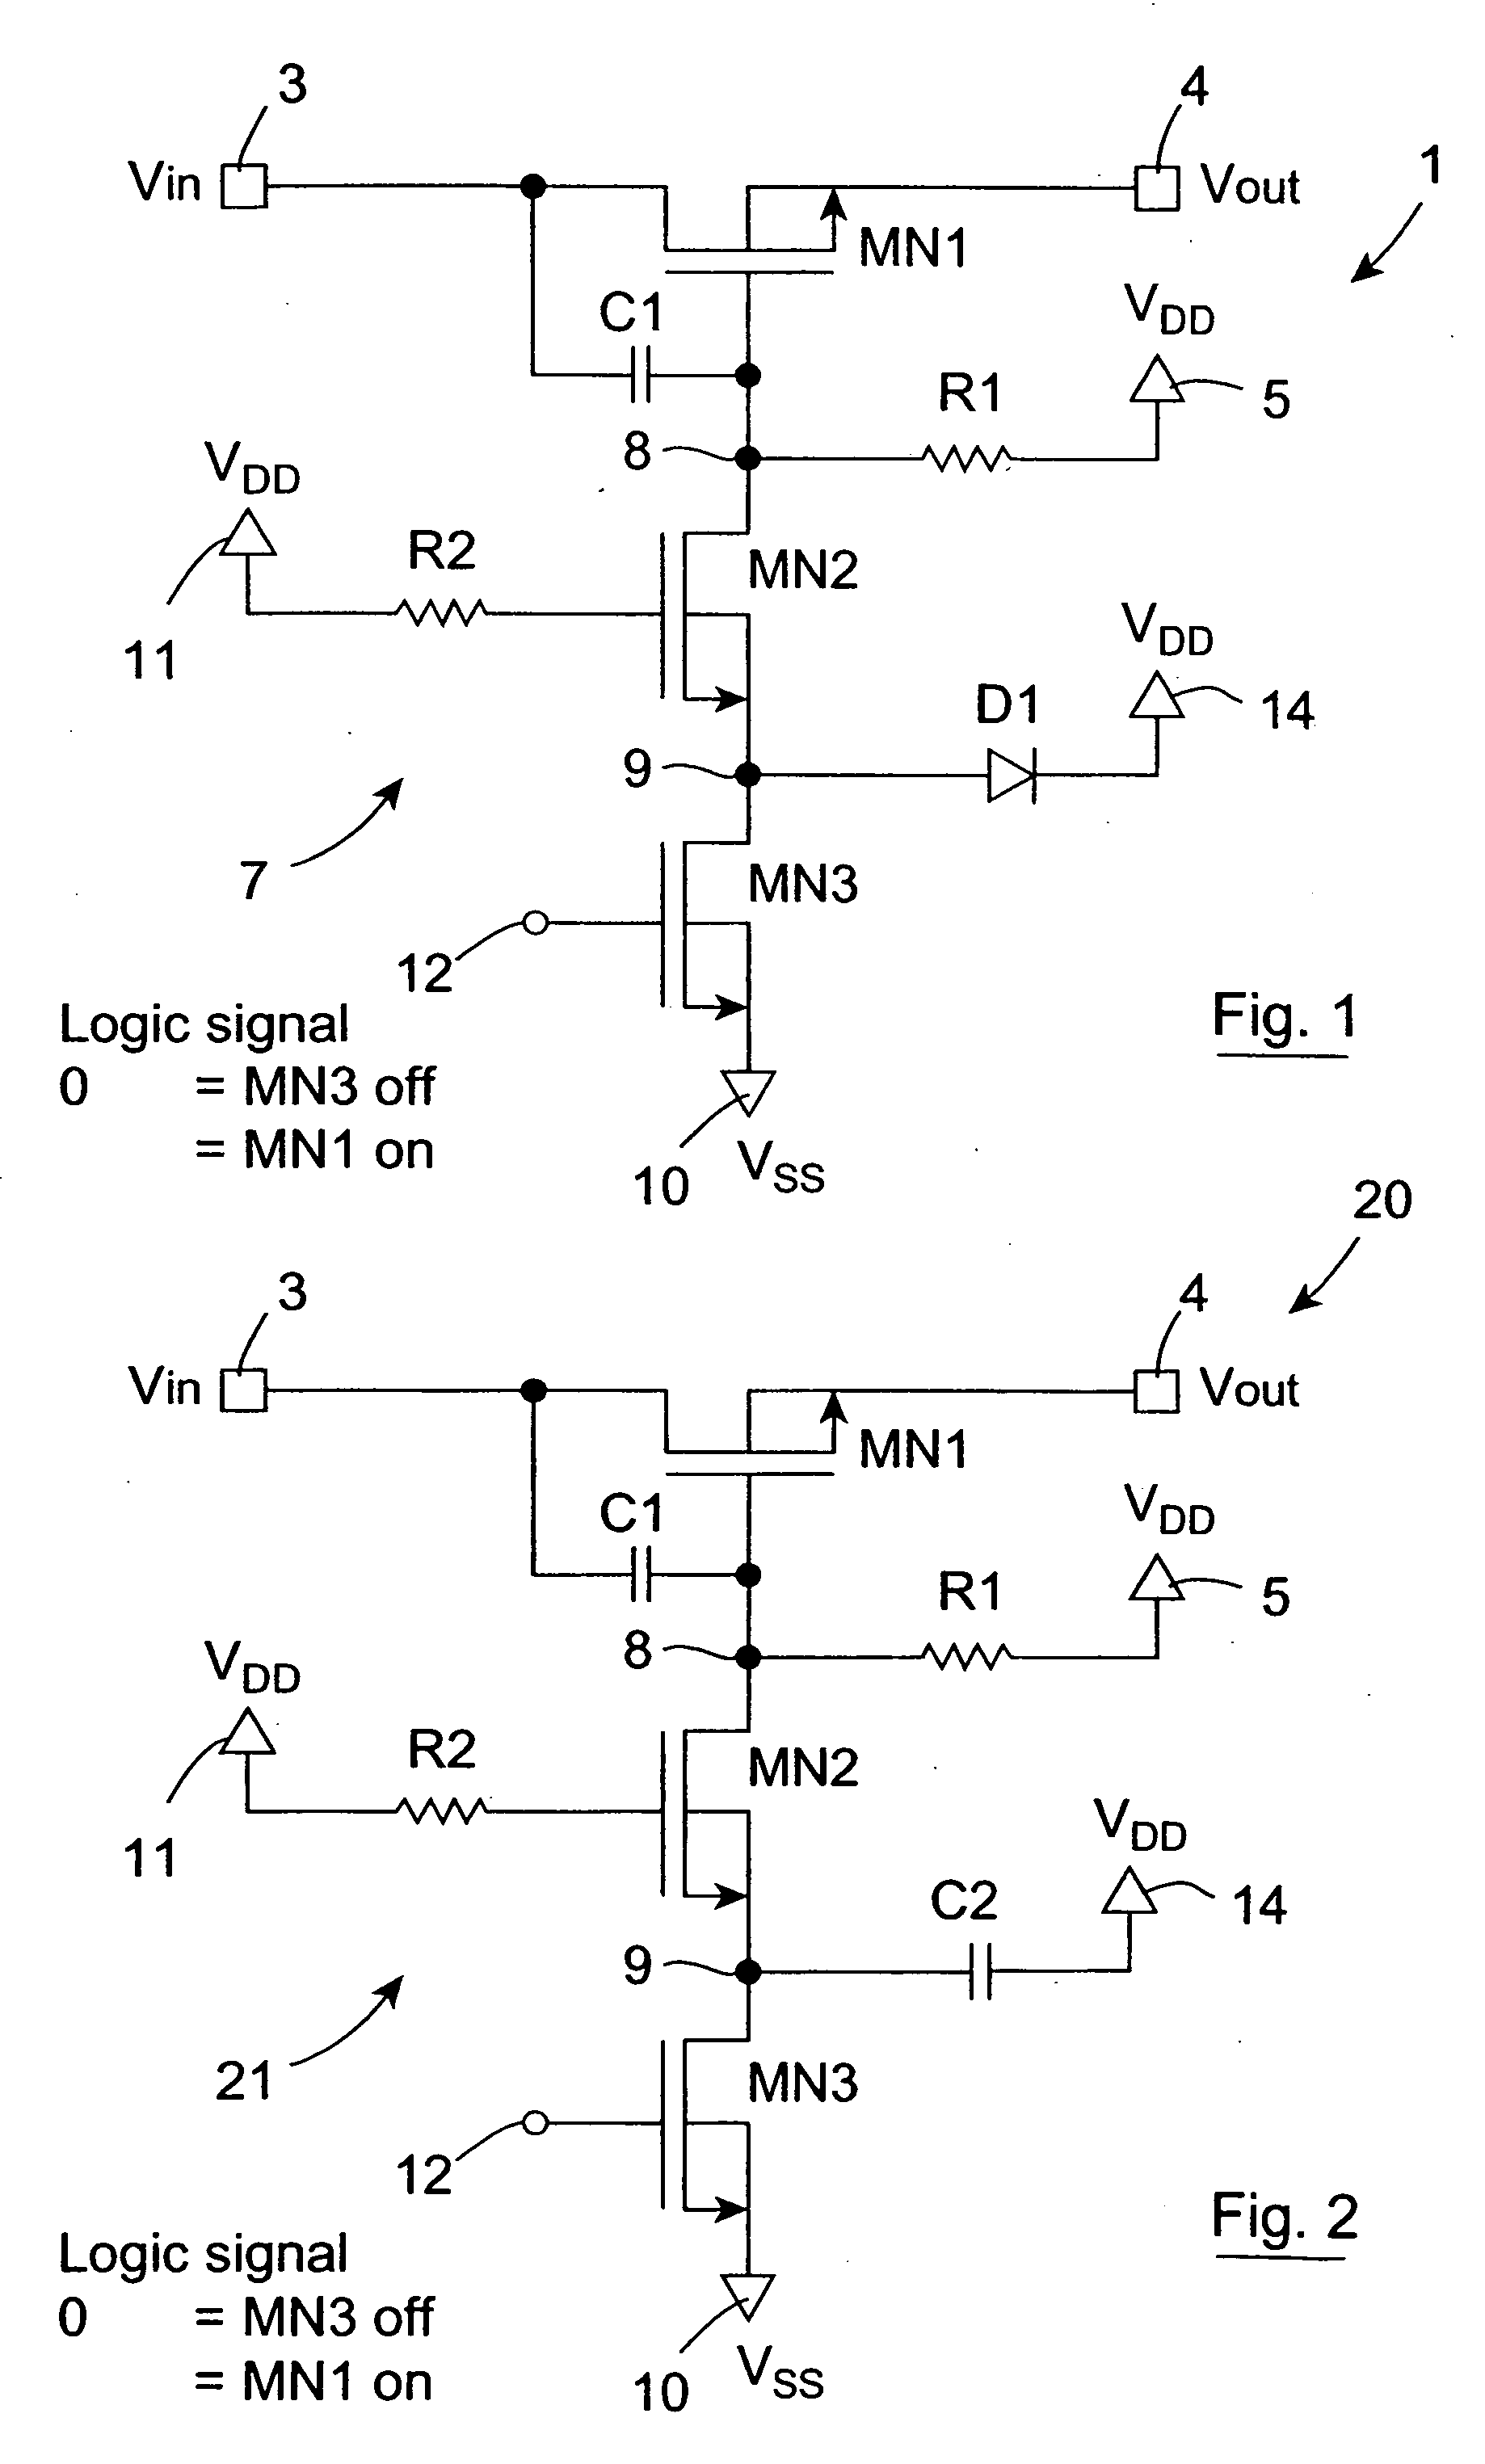 Open drain driver, and a switch comprising the open drain driver